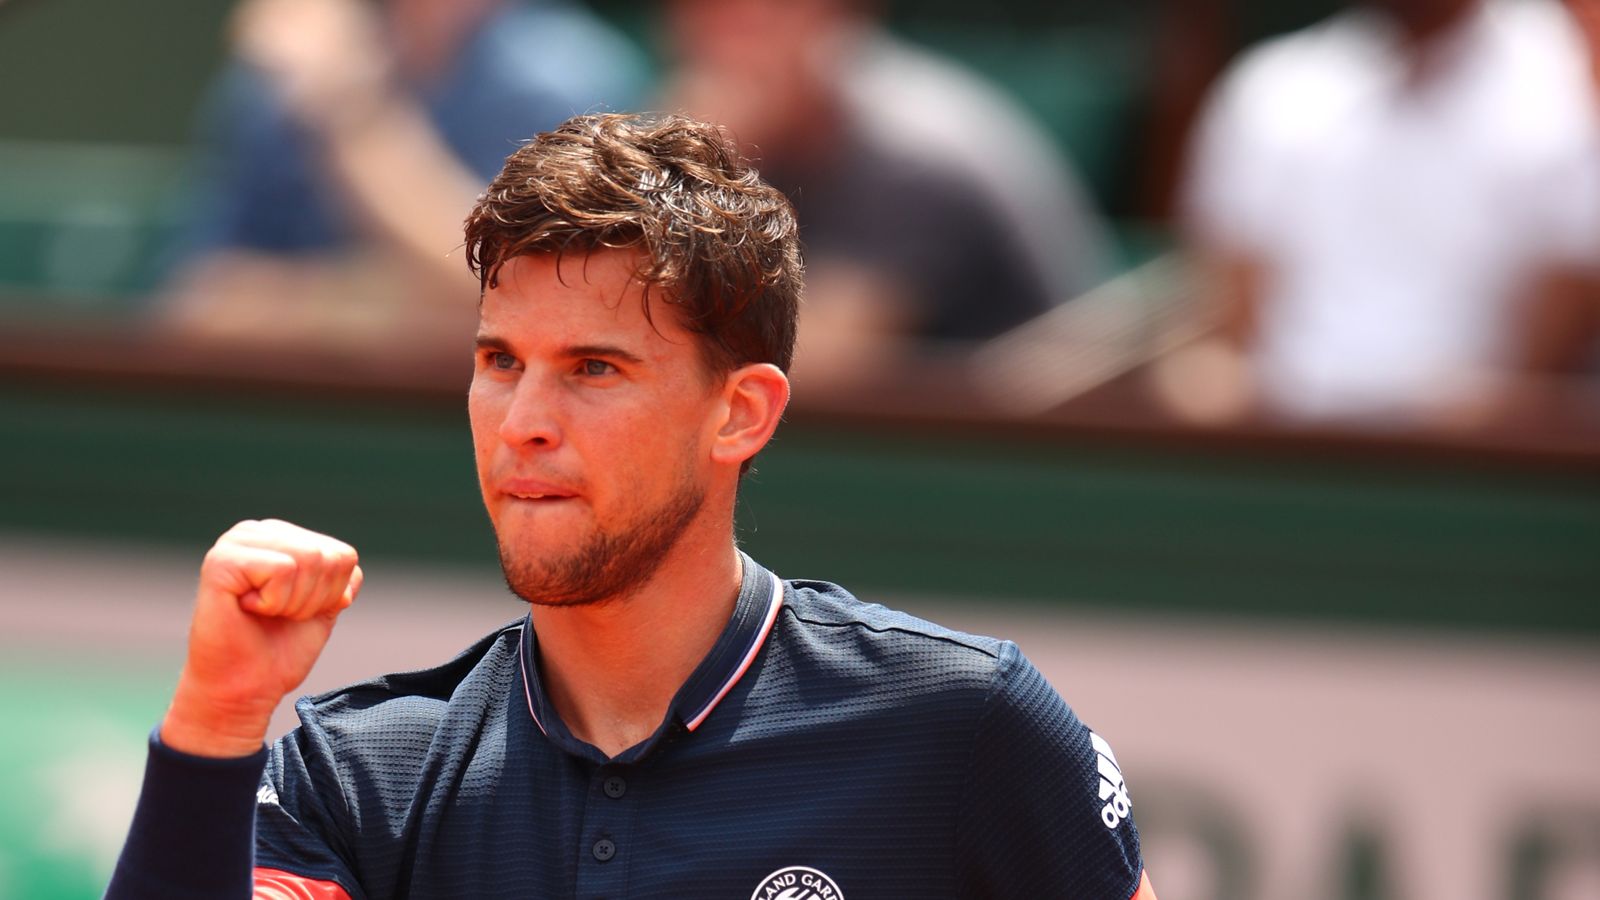 Dominic Thiem reaches French Open final with win over Marco Cecchinato Tennis News Sky Sports